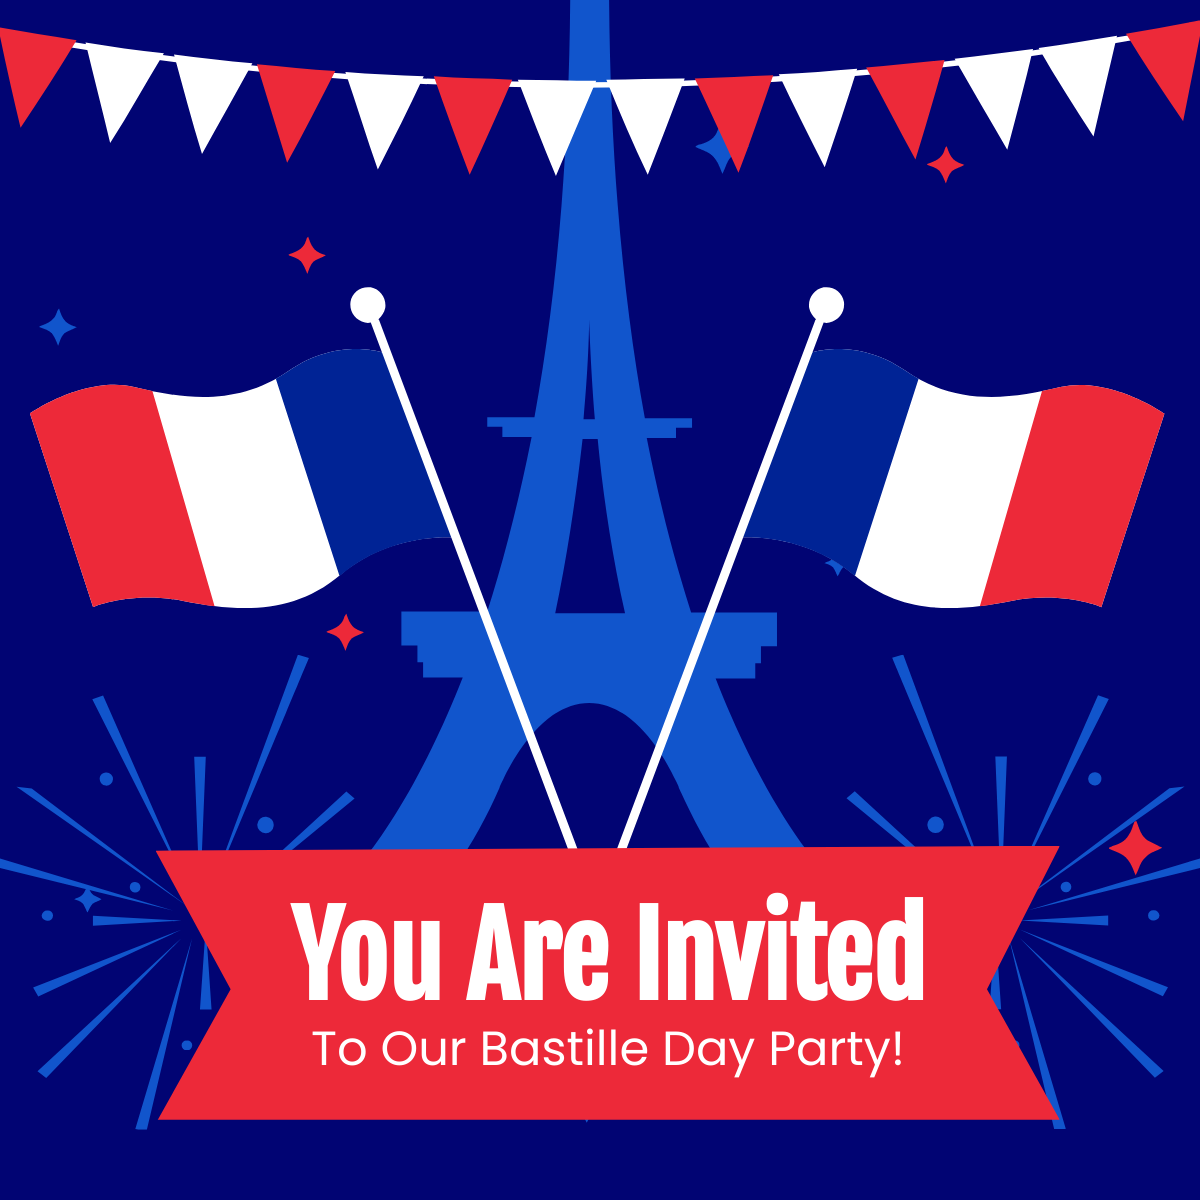 Bastille Day Party Linkedin Post Template